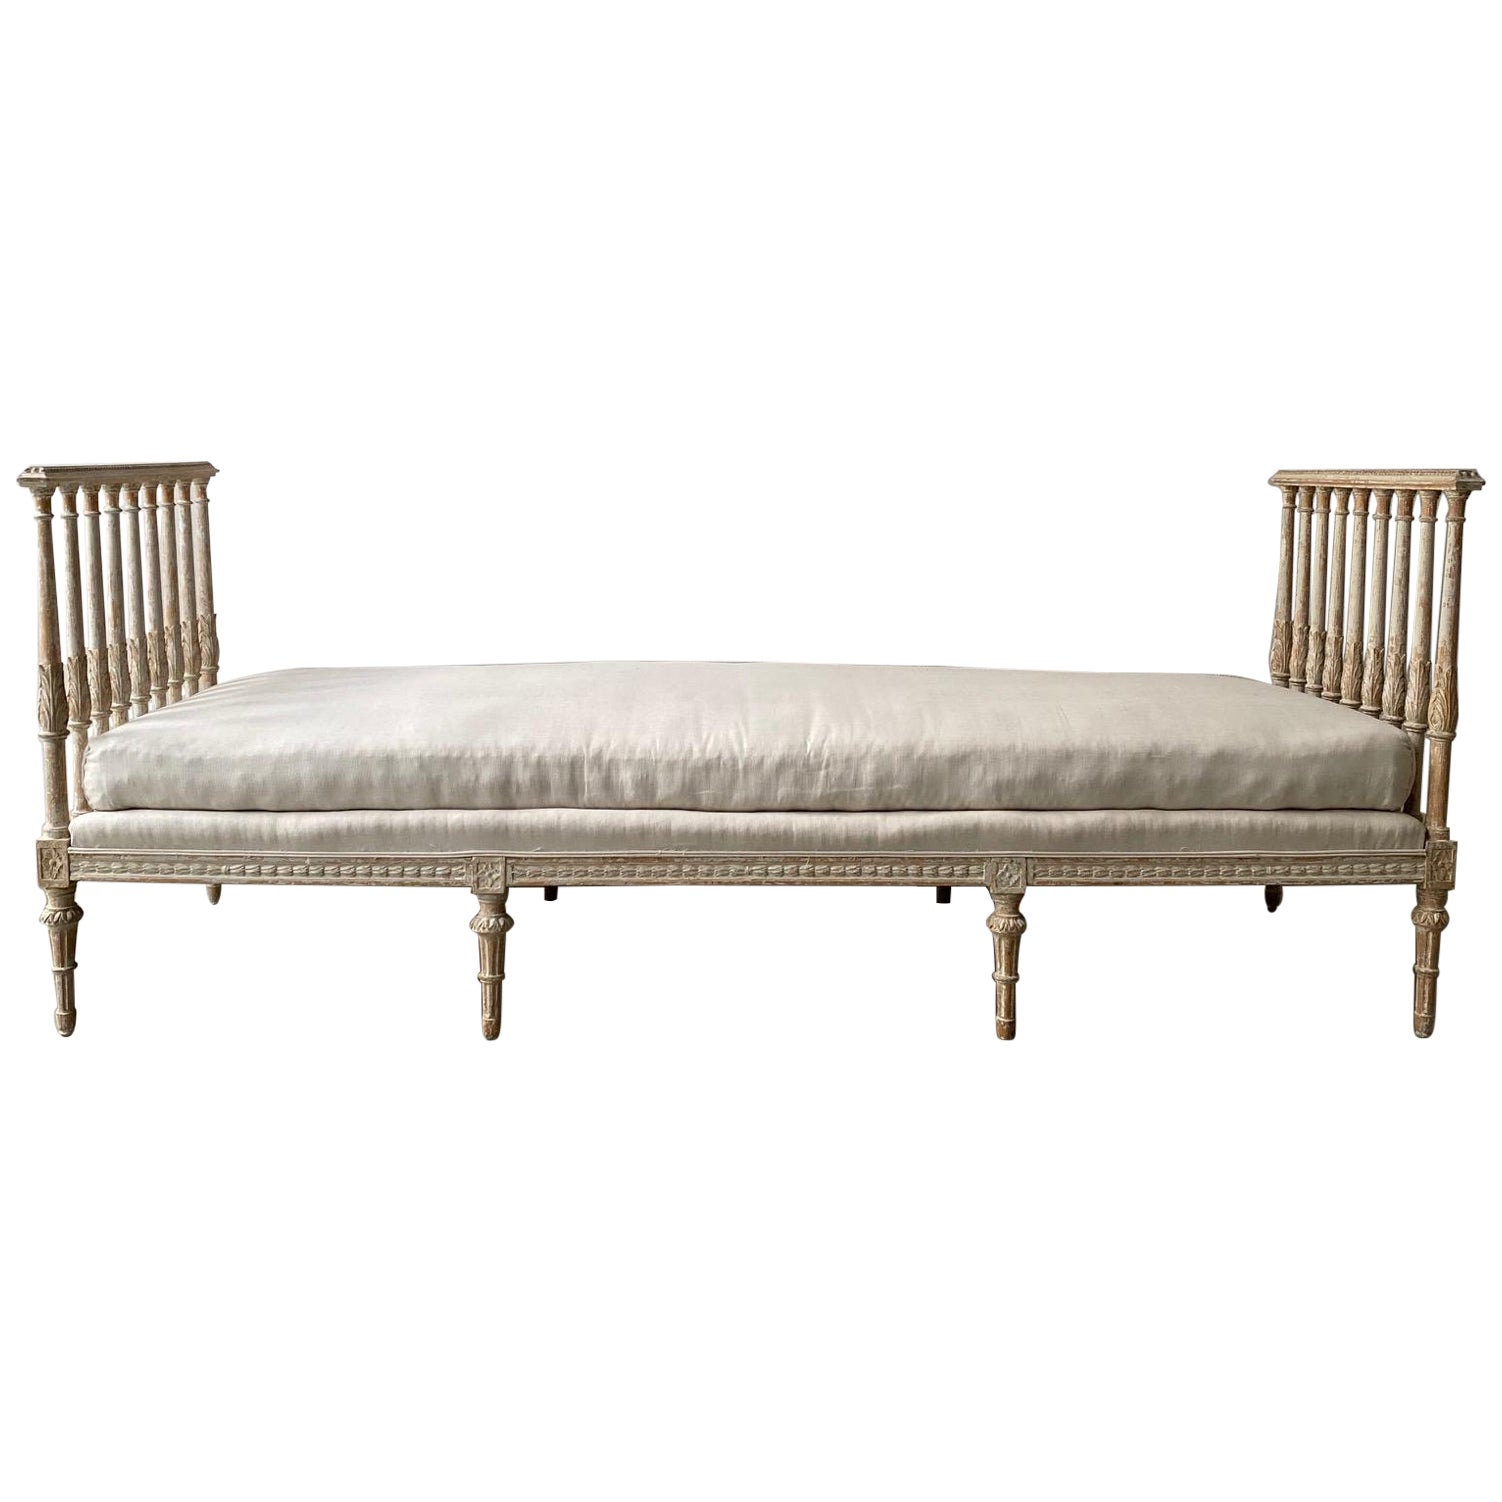 18th C. Swedish Gustavian Period Daybed Sofa in Original Paint by Johan Lindgren